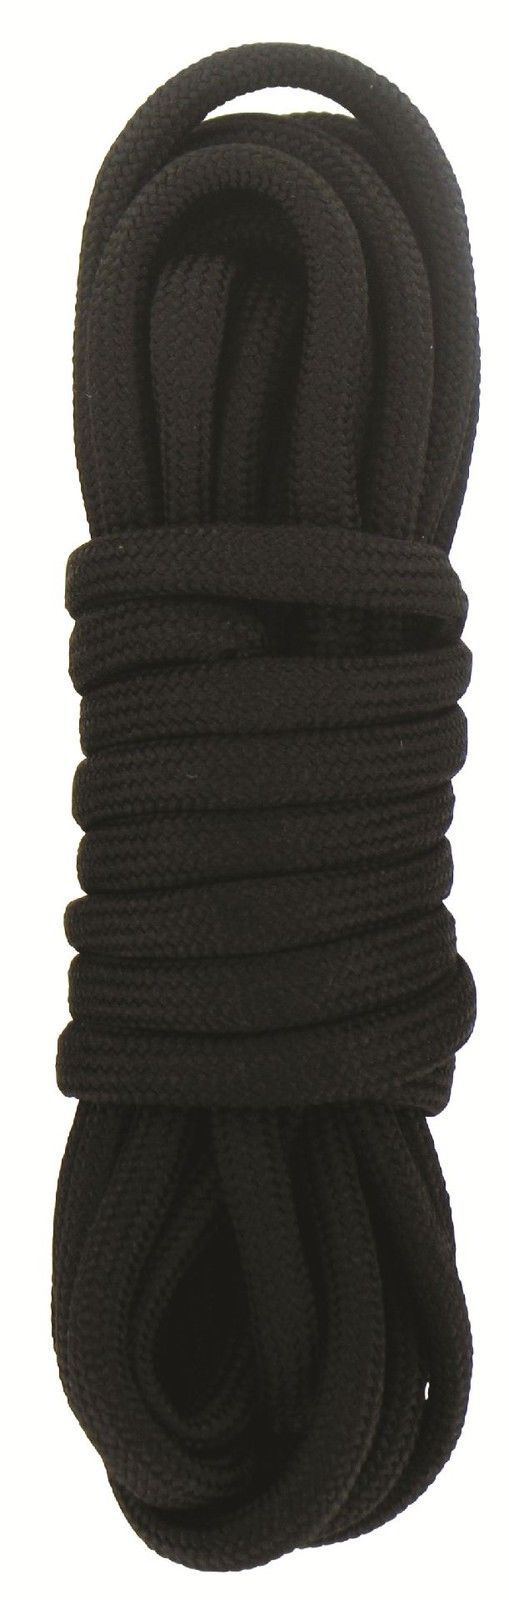 Round Black Shoe/Boot Laces with Plastic Ends - 53 inches long